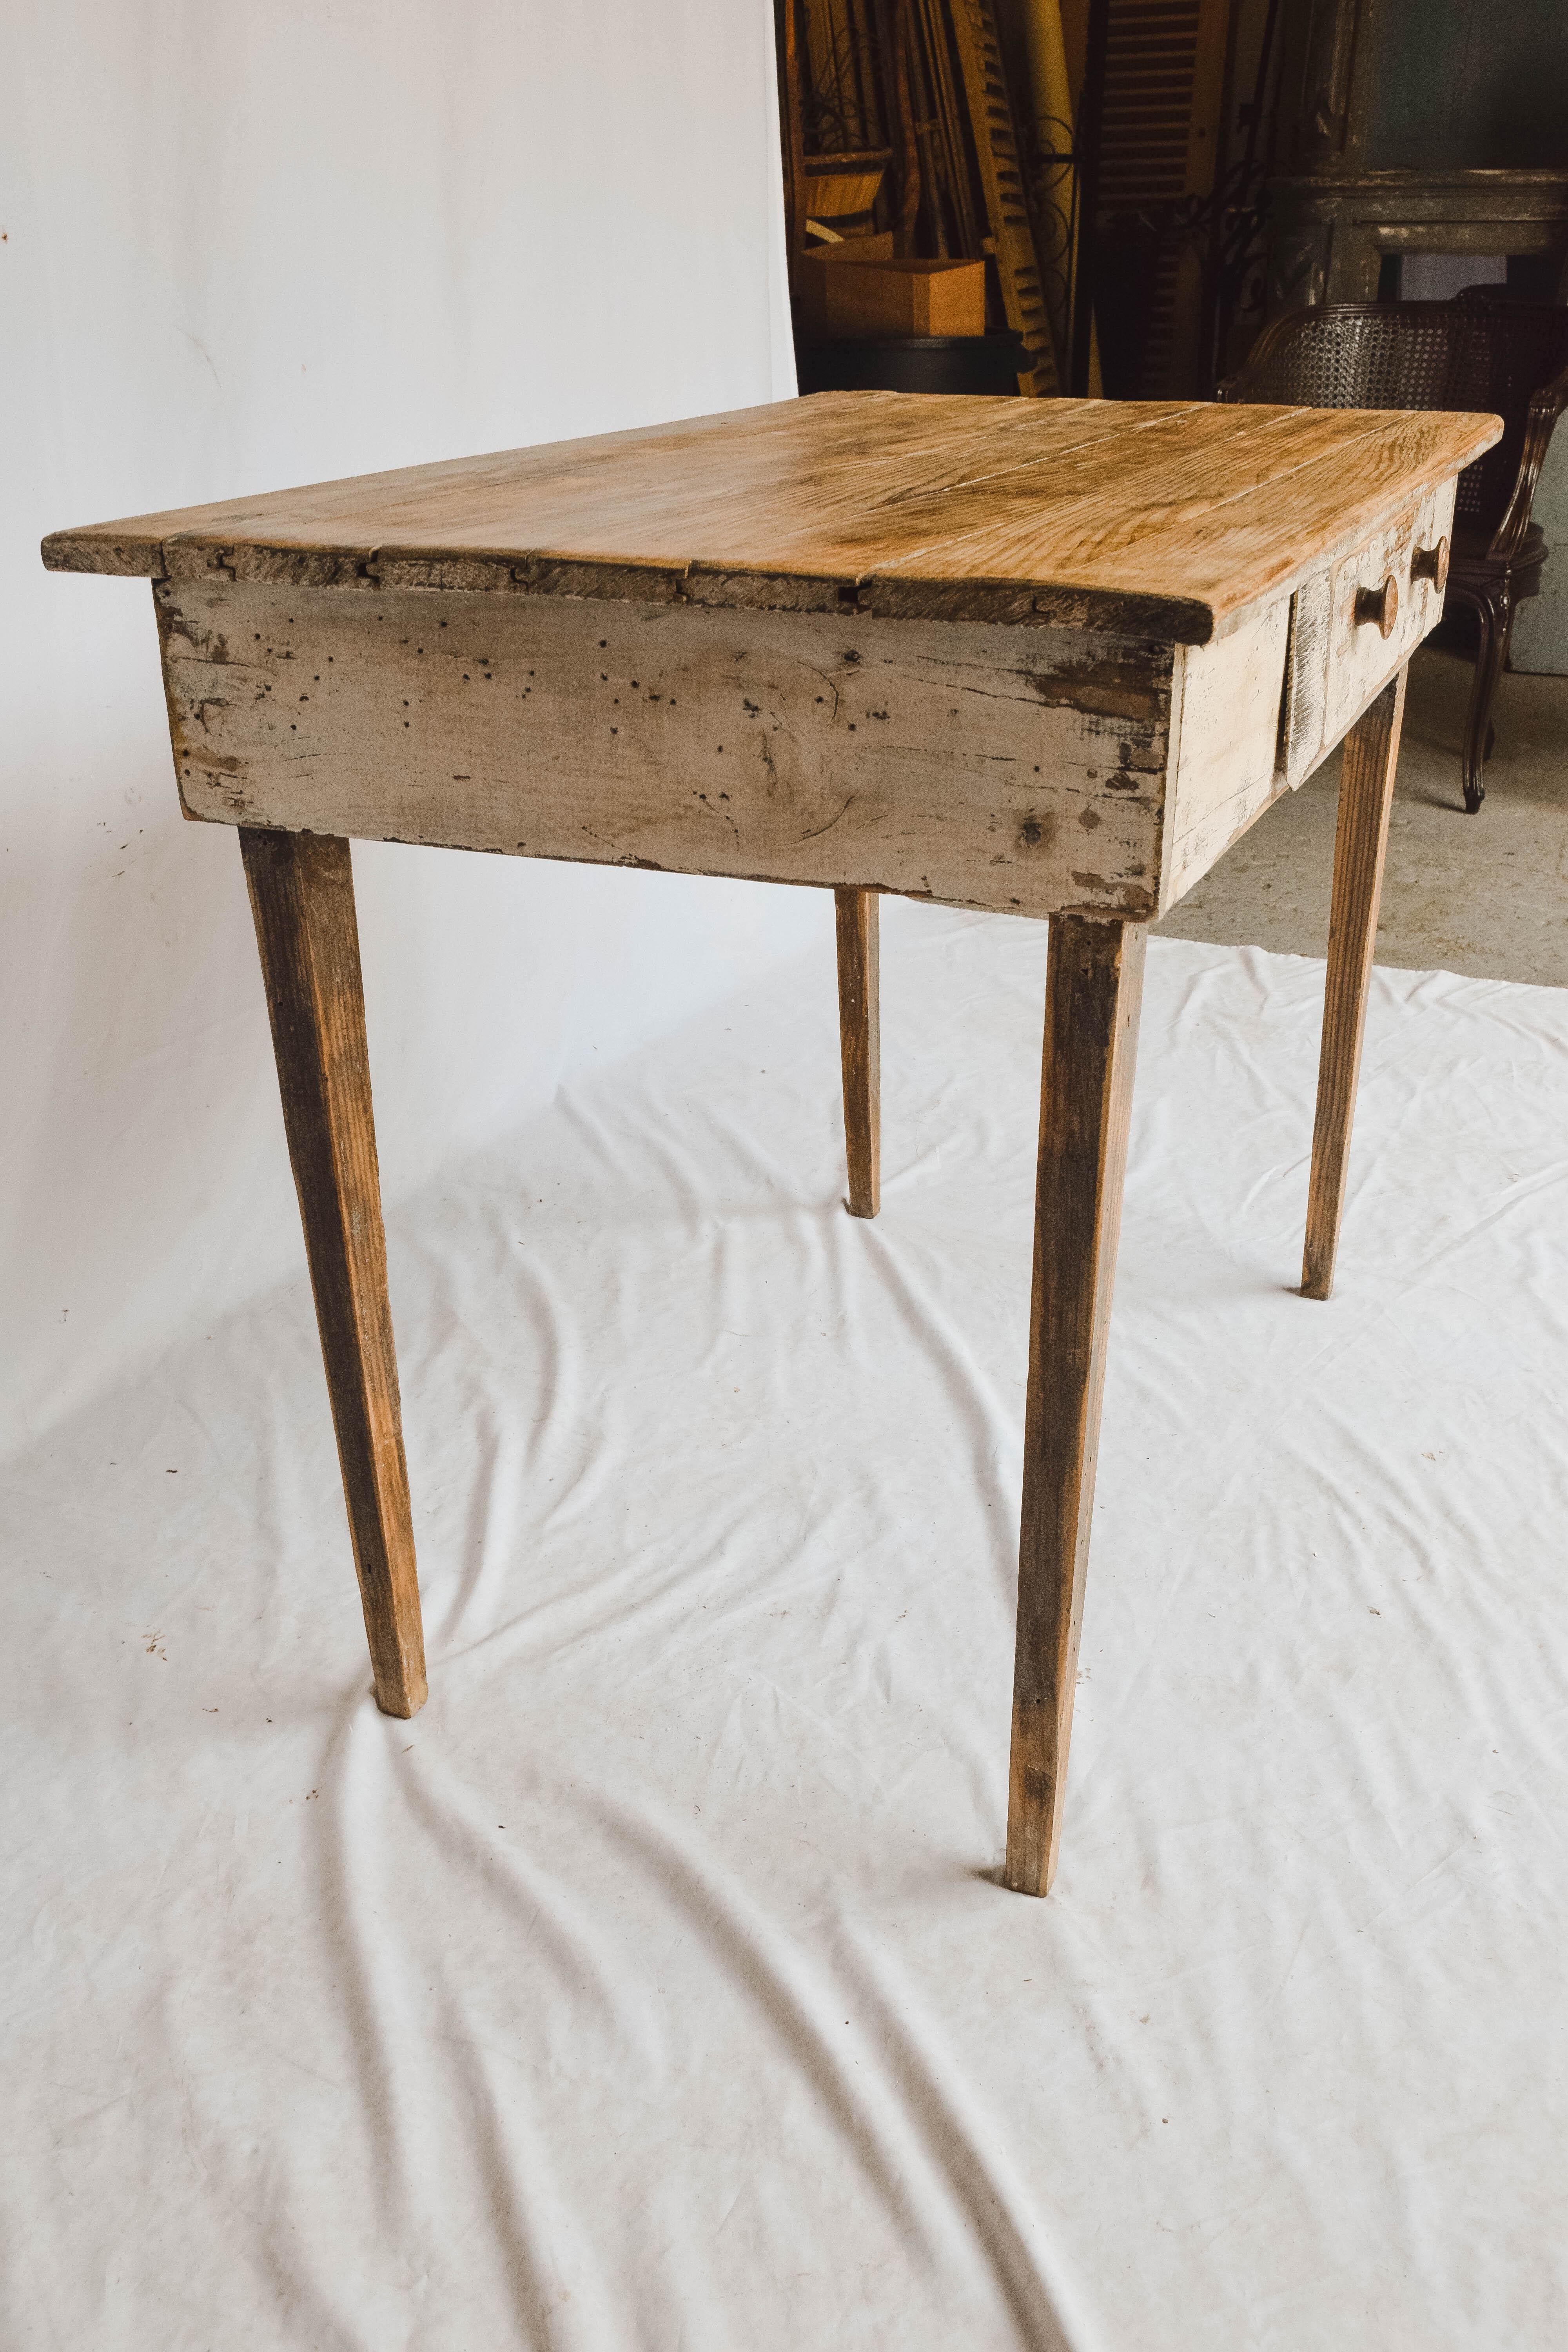 20th Century Farm Table with Drawer